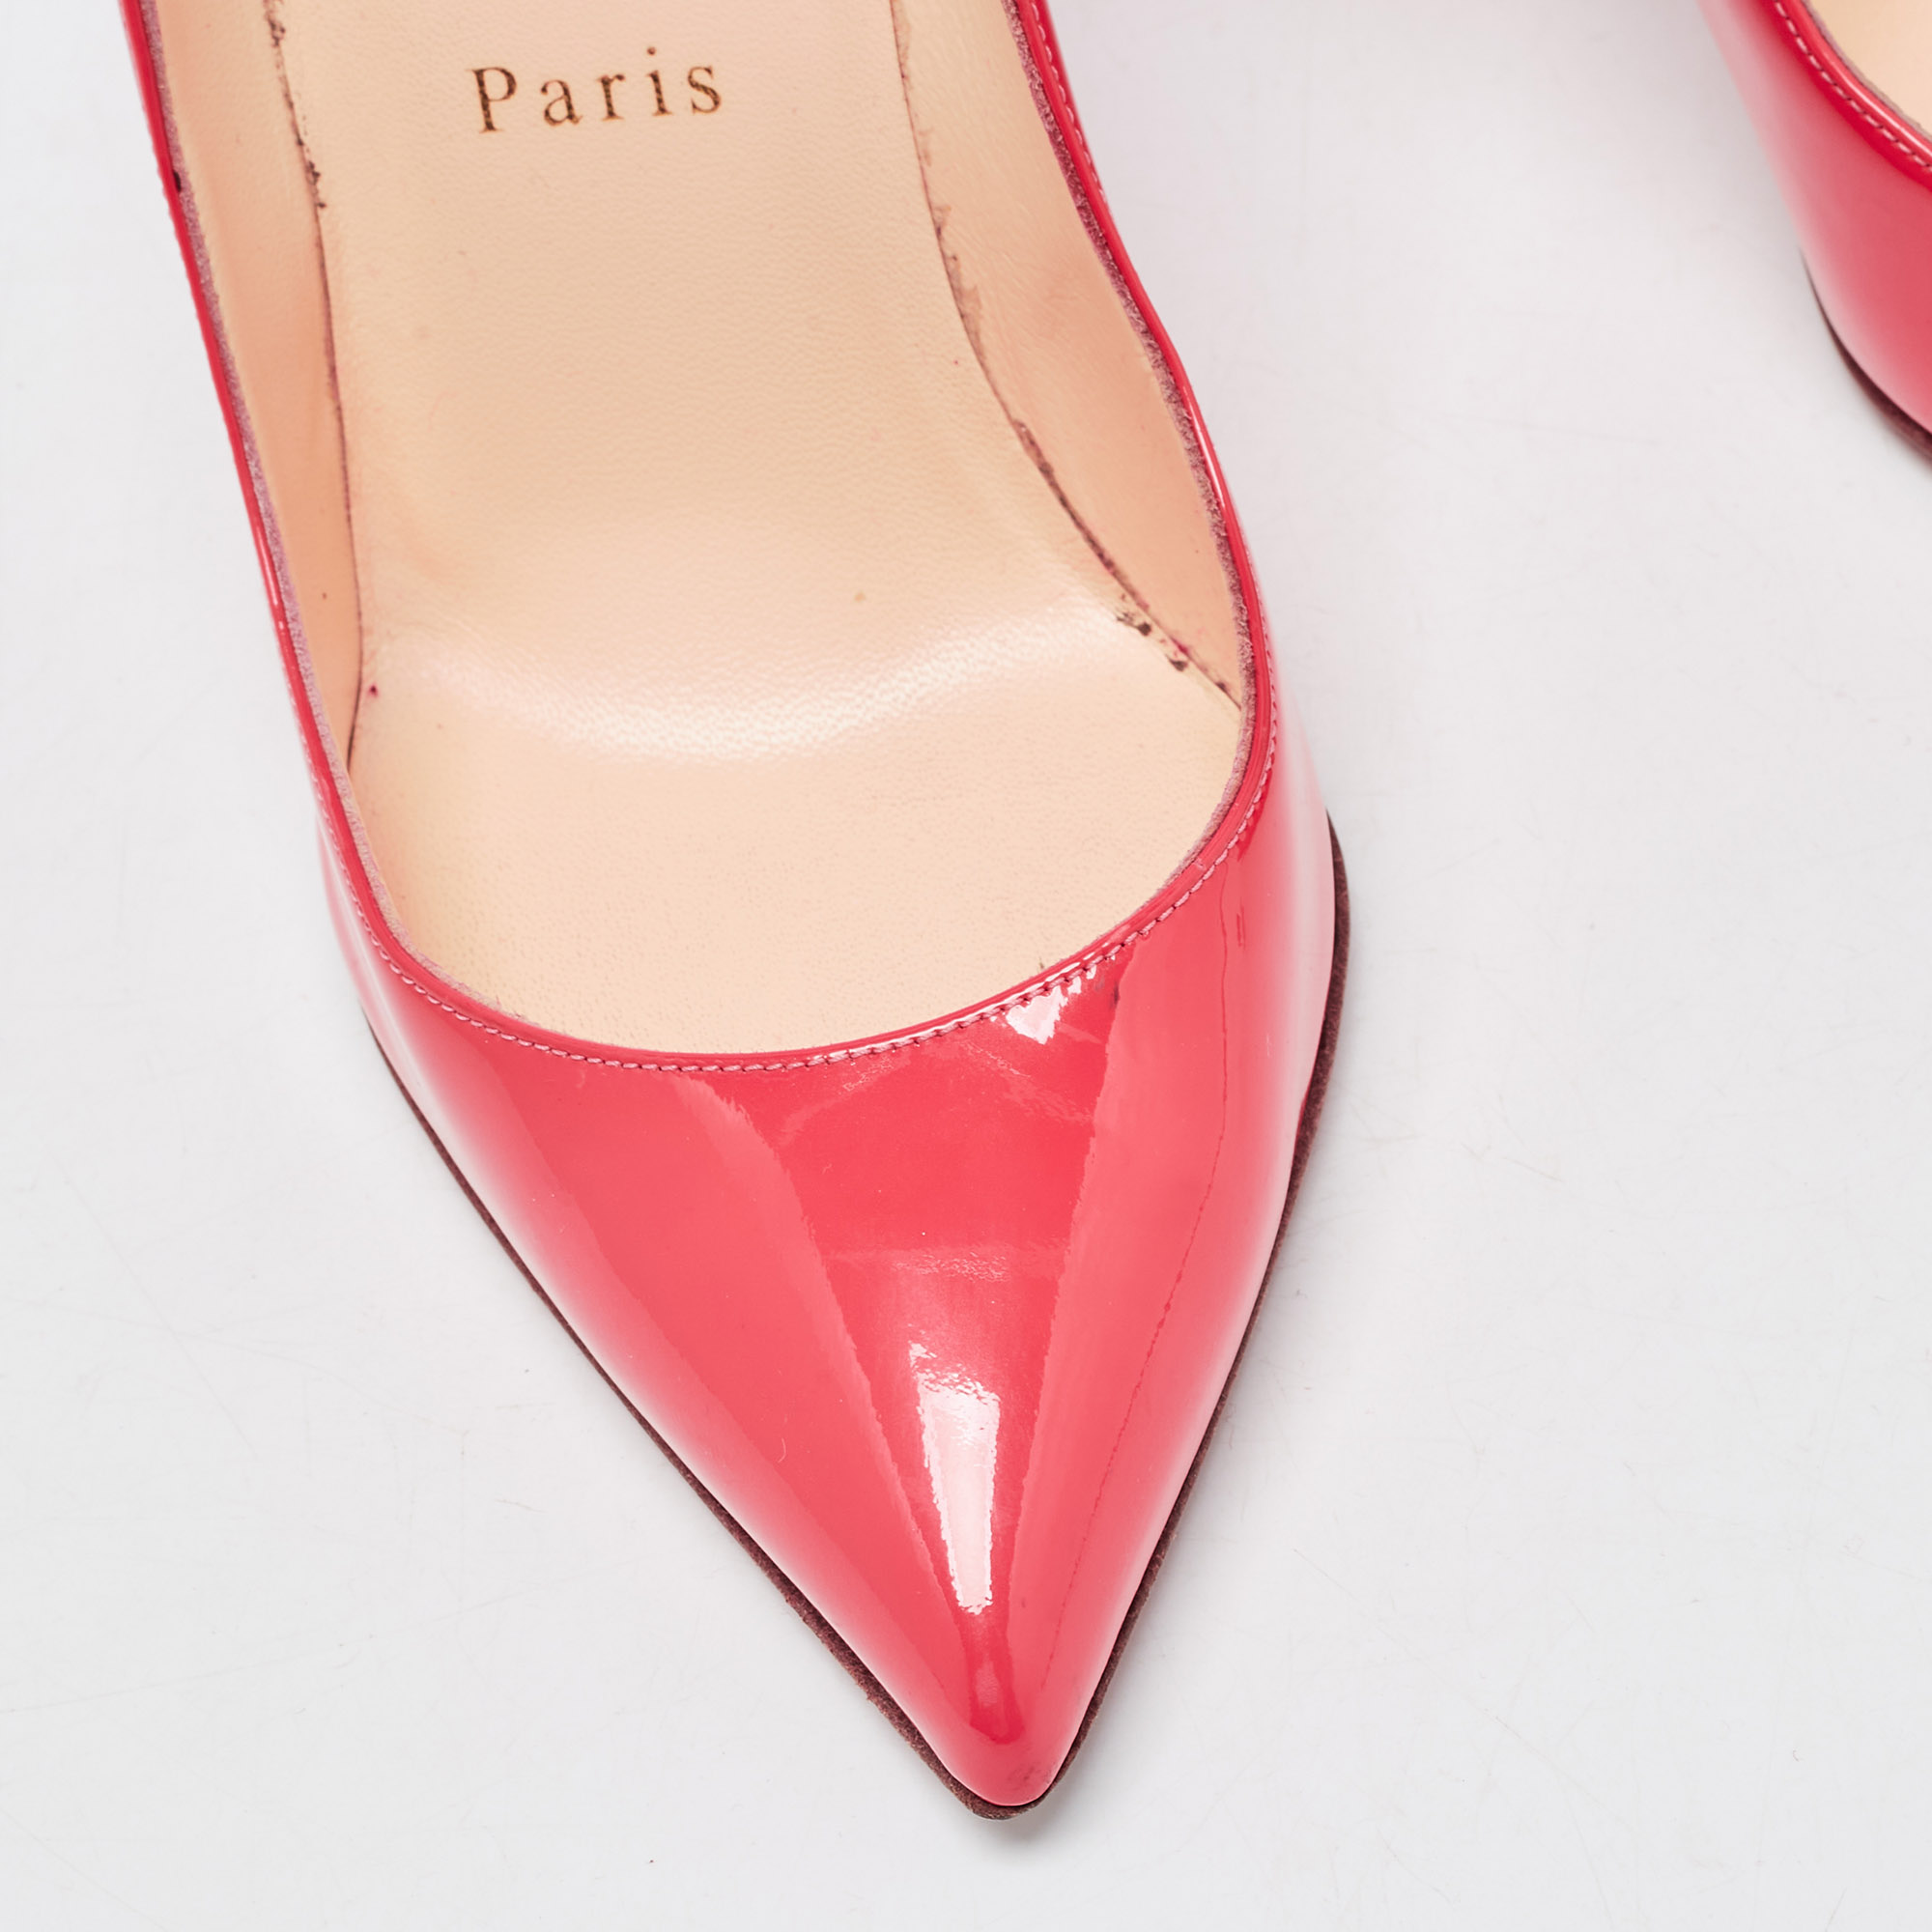 Christian Louboutin Pink Patent Leather Pigalle Follies Pumps Size 37